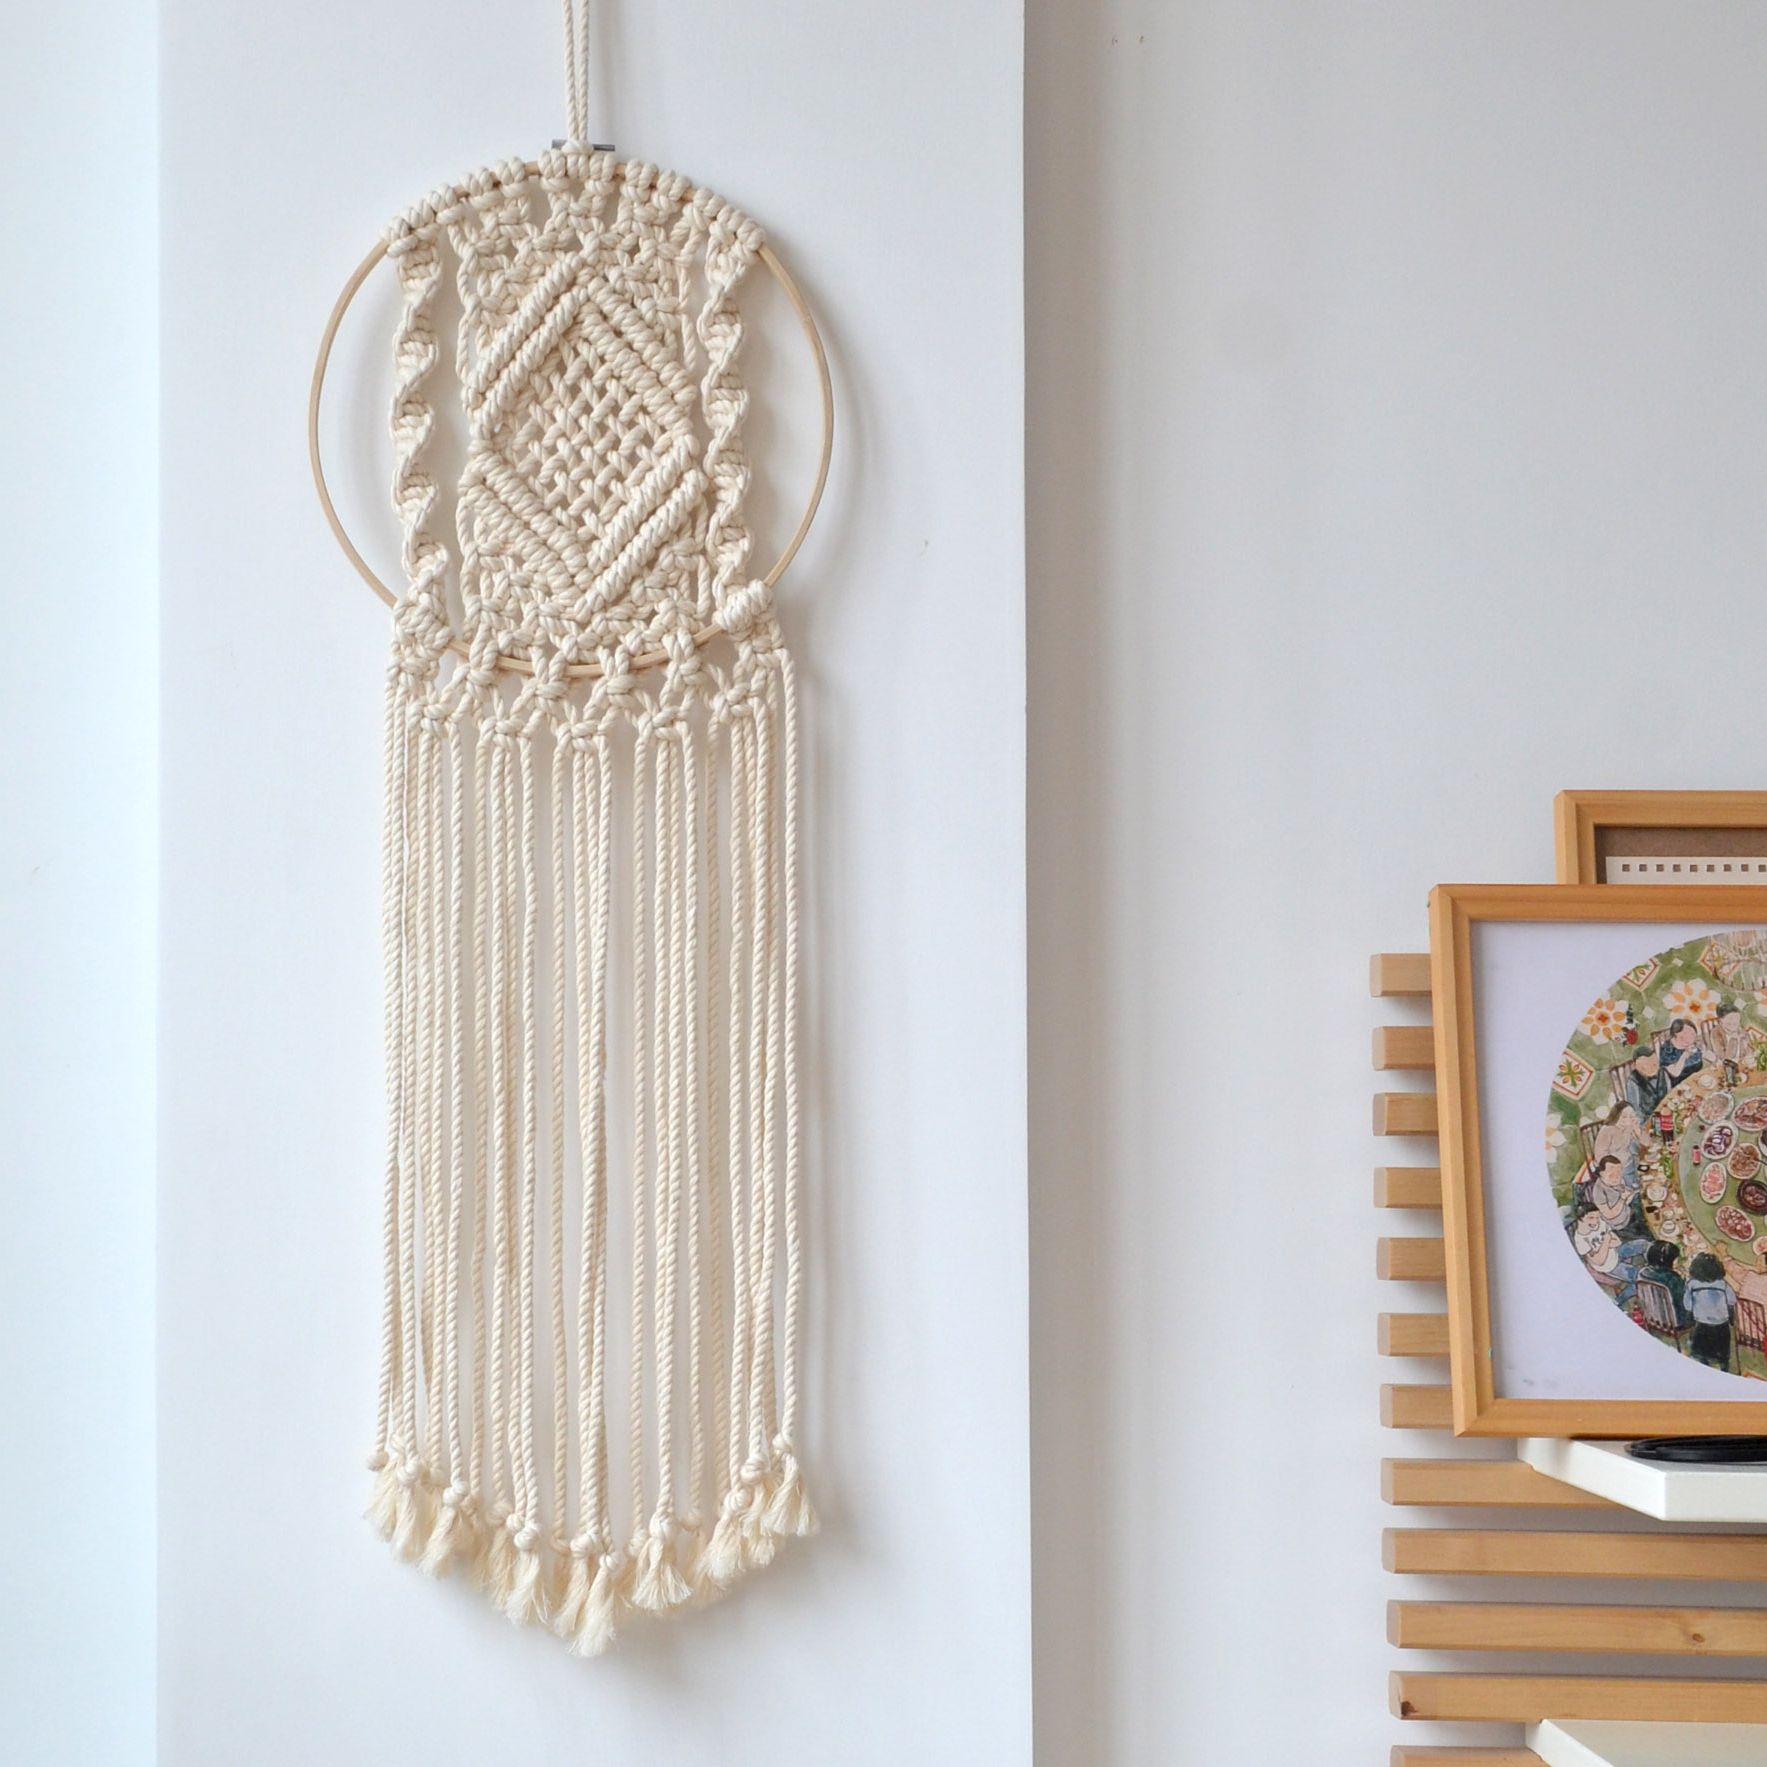 Famous Diameter 25cm Macrame Wall Hanging Decoration Wall Art Handmade In Lace Wall Art (View 4 of 15)